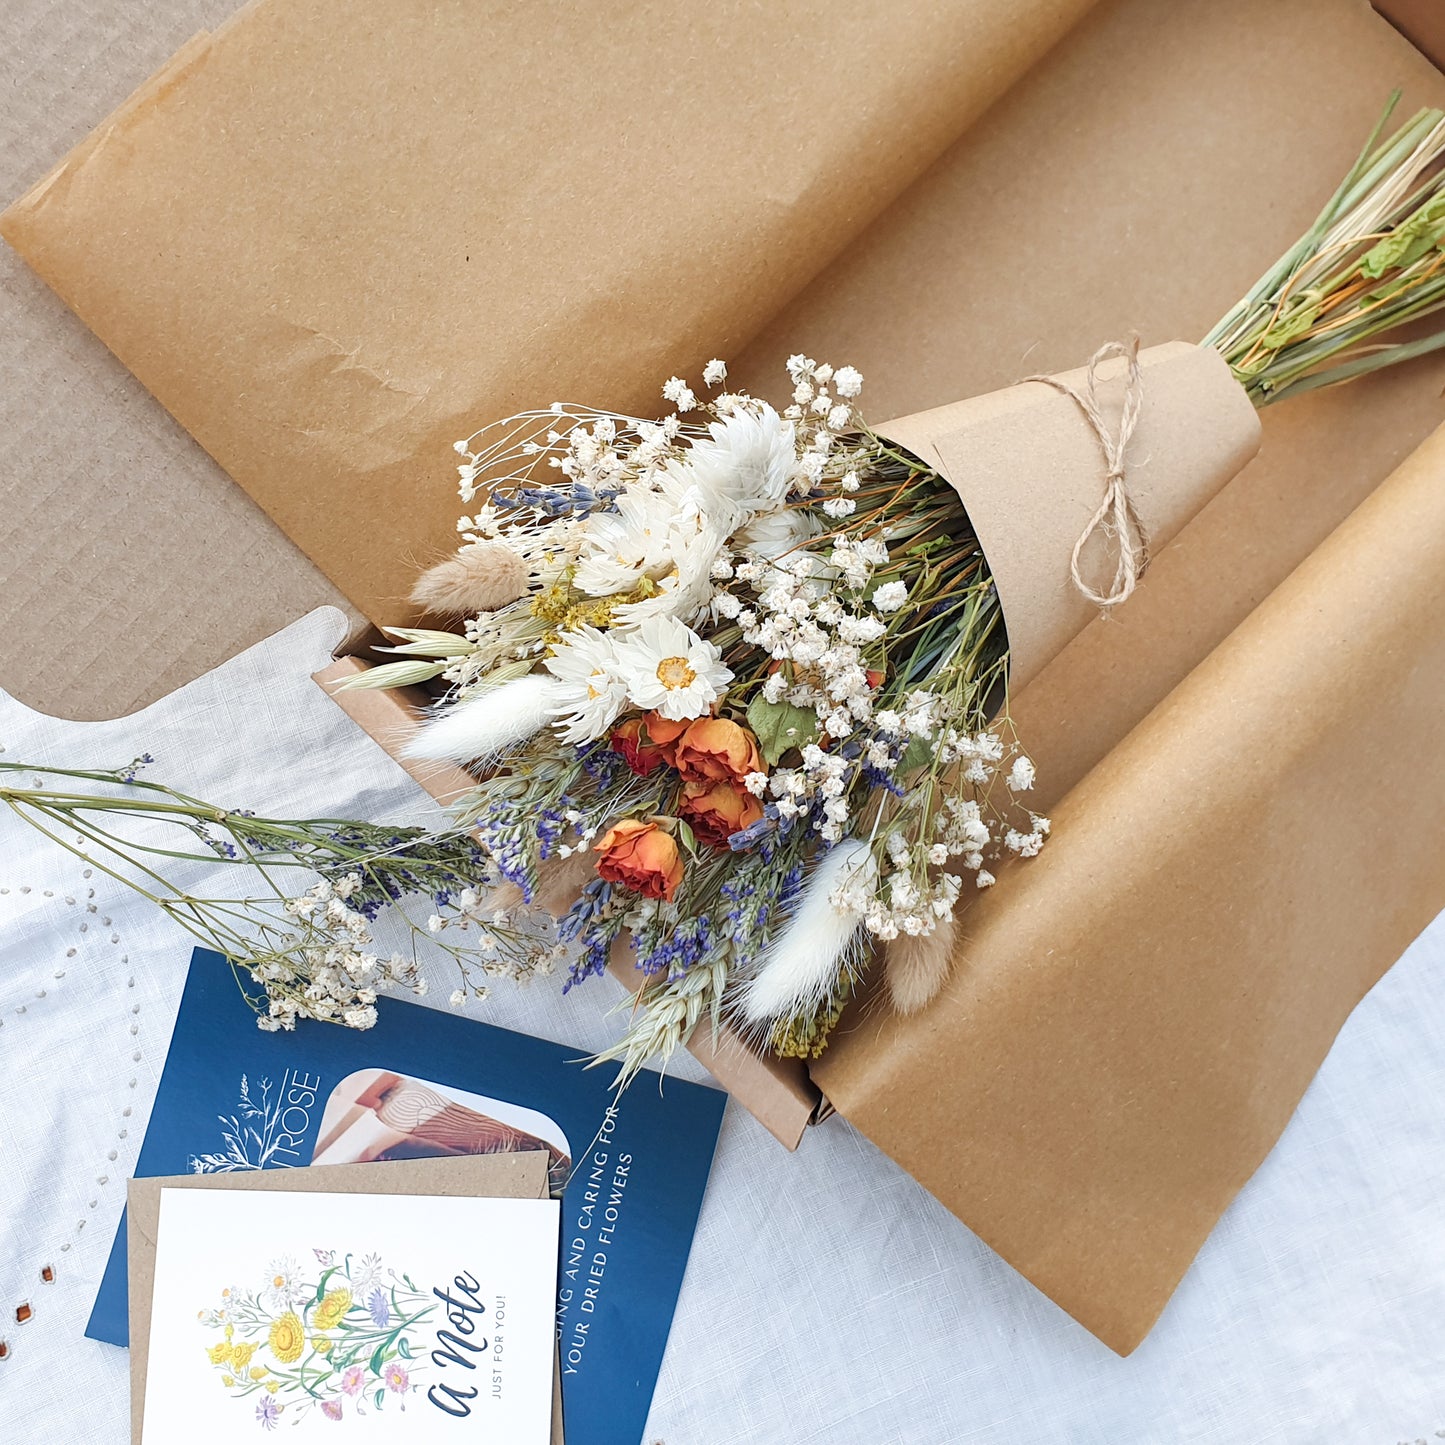 The dried flower bouquet wrapped in a kraft card cone sits in its packaging box with a pretty recycled tissue layer. It has small orange roses, white daisies with yellow centres, lilac sea lavender and pretty white gypsophila among other grasses and fillers. In the background you can see the optional gift card and instructions for caring for dried flowers.